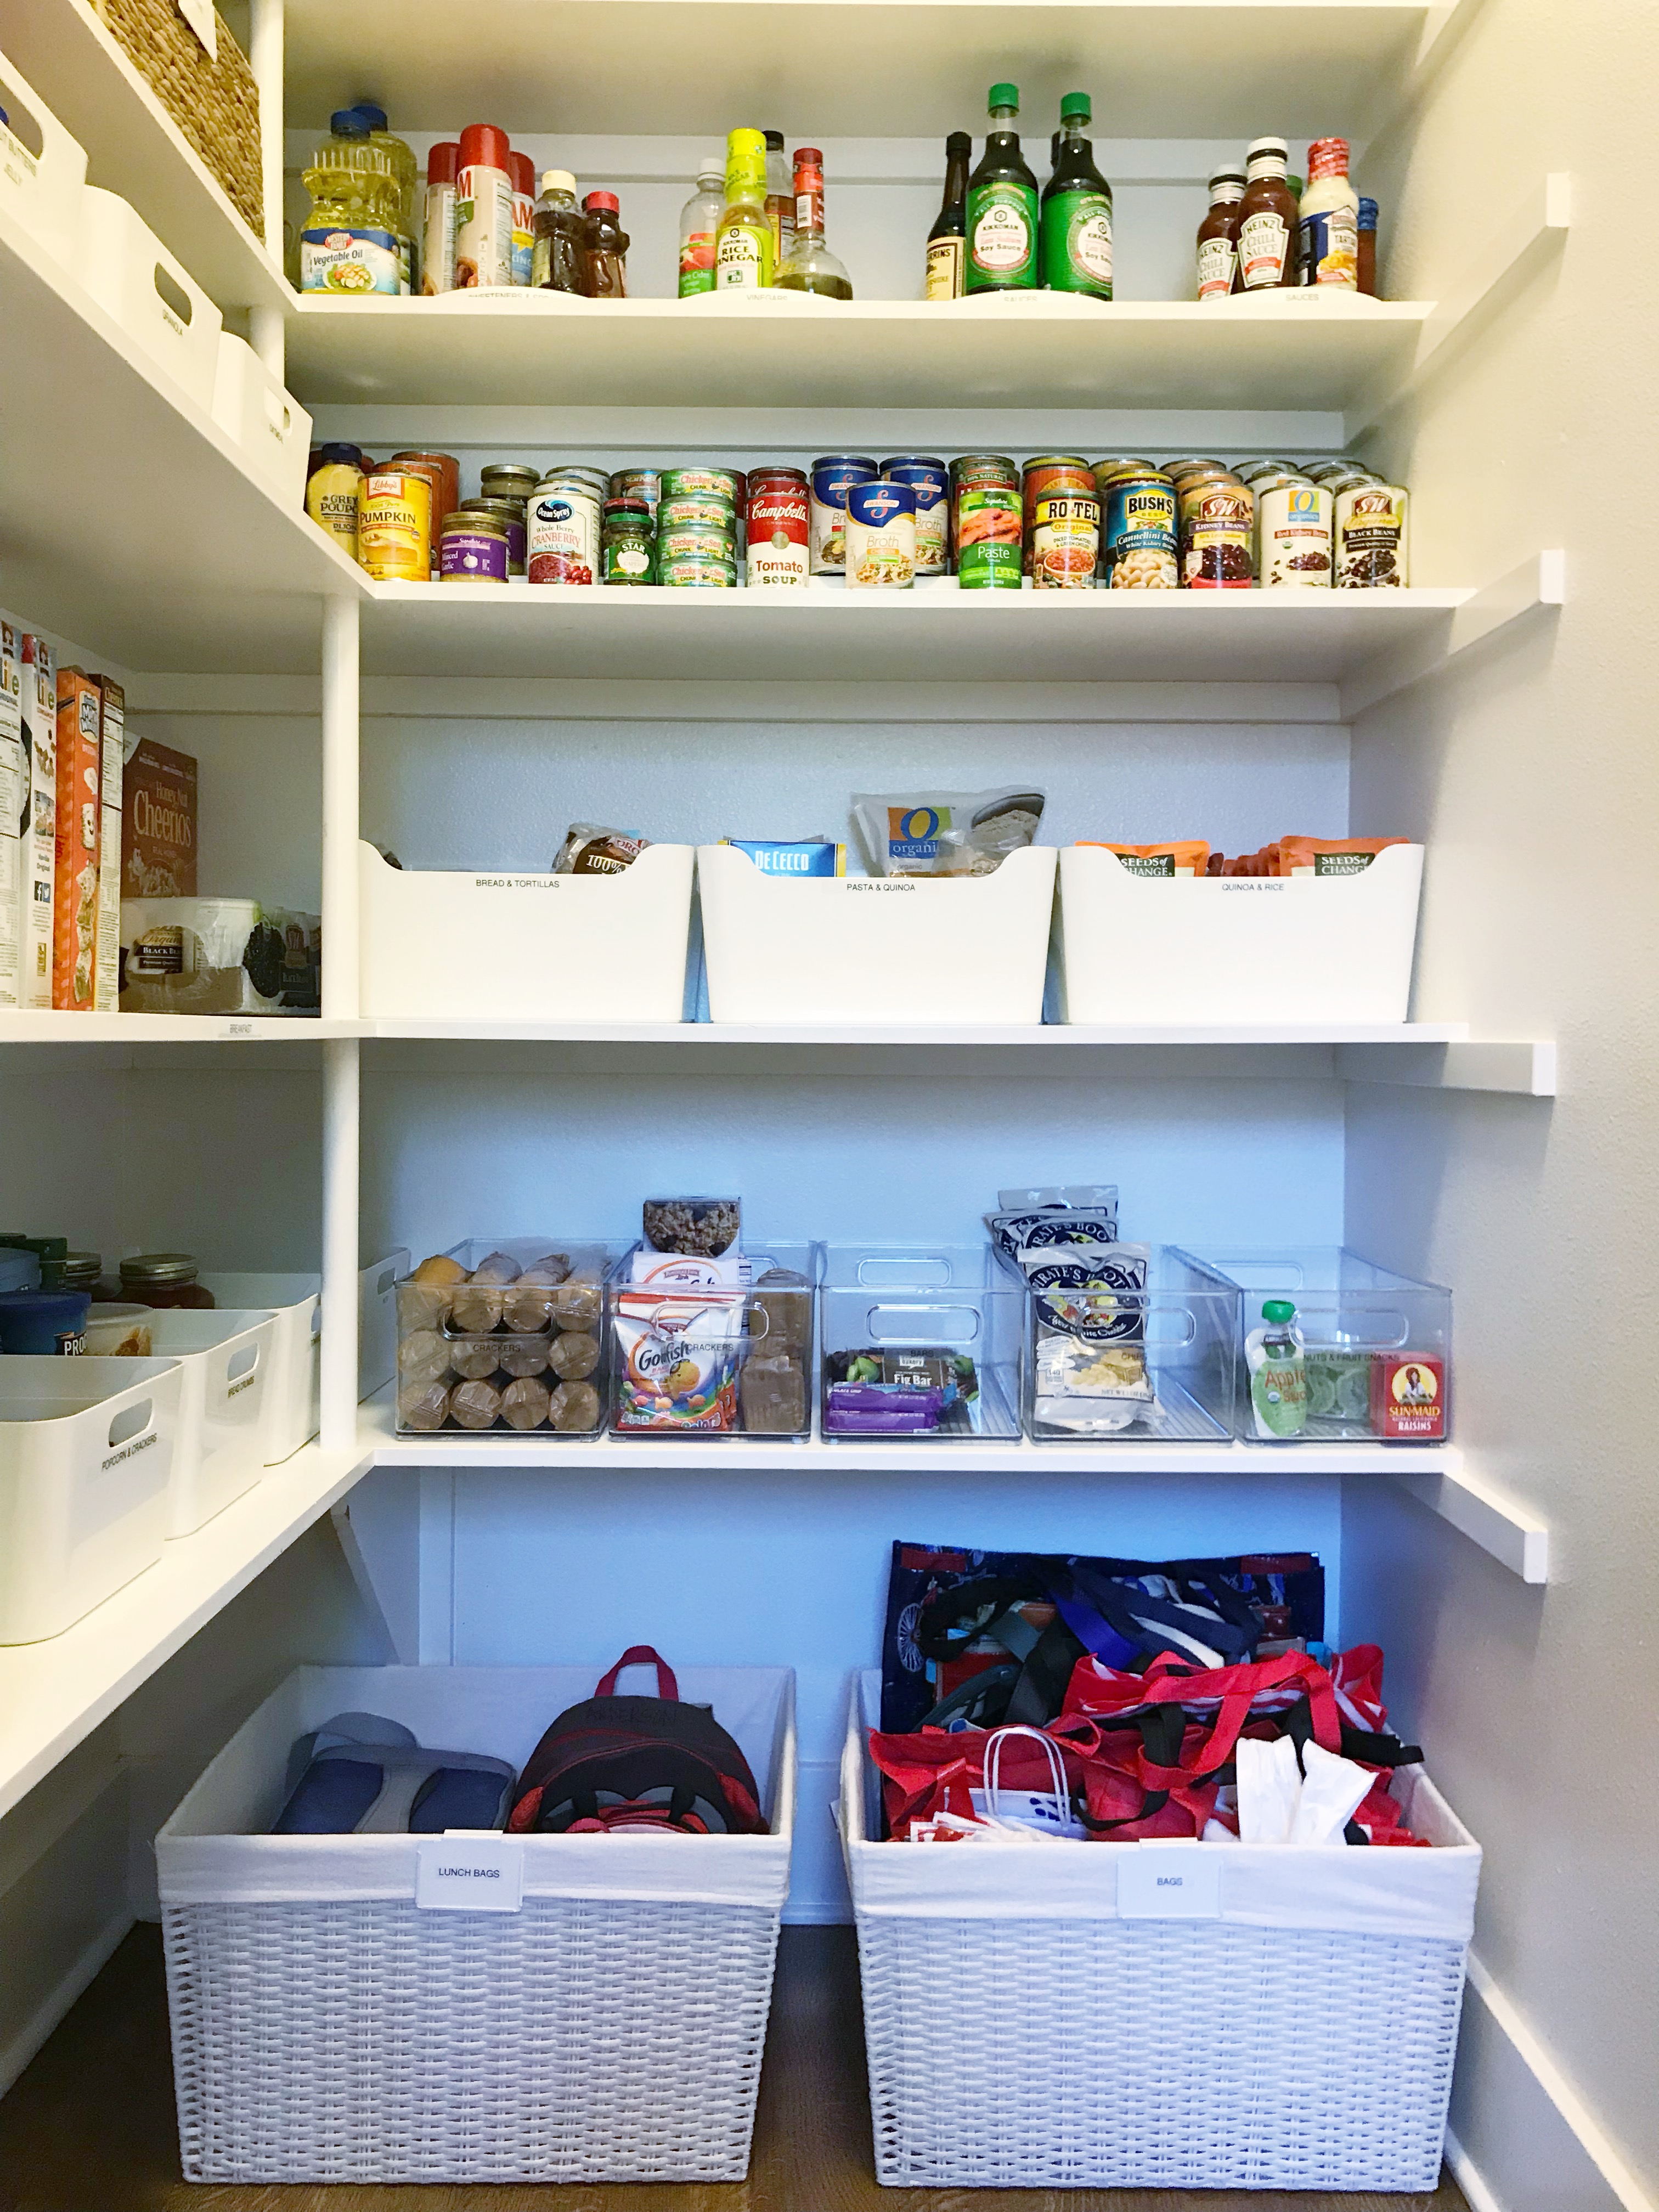 A: Every single pantry needs to have some form of a basket or bin